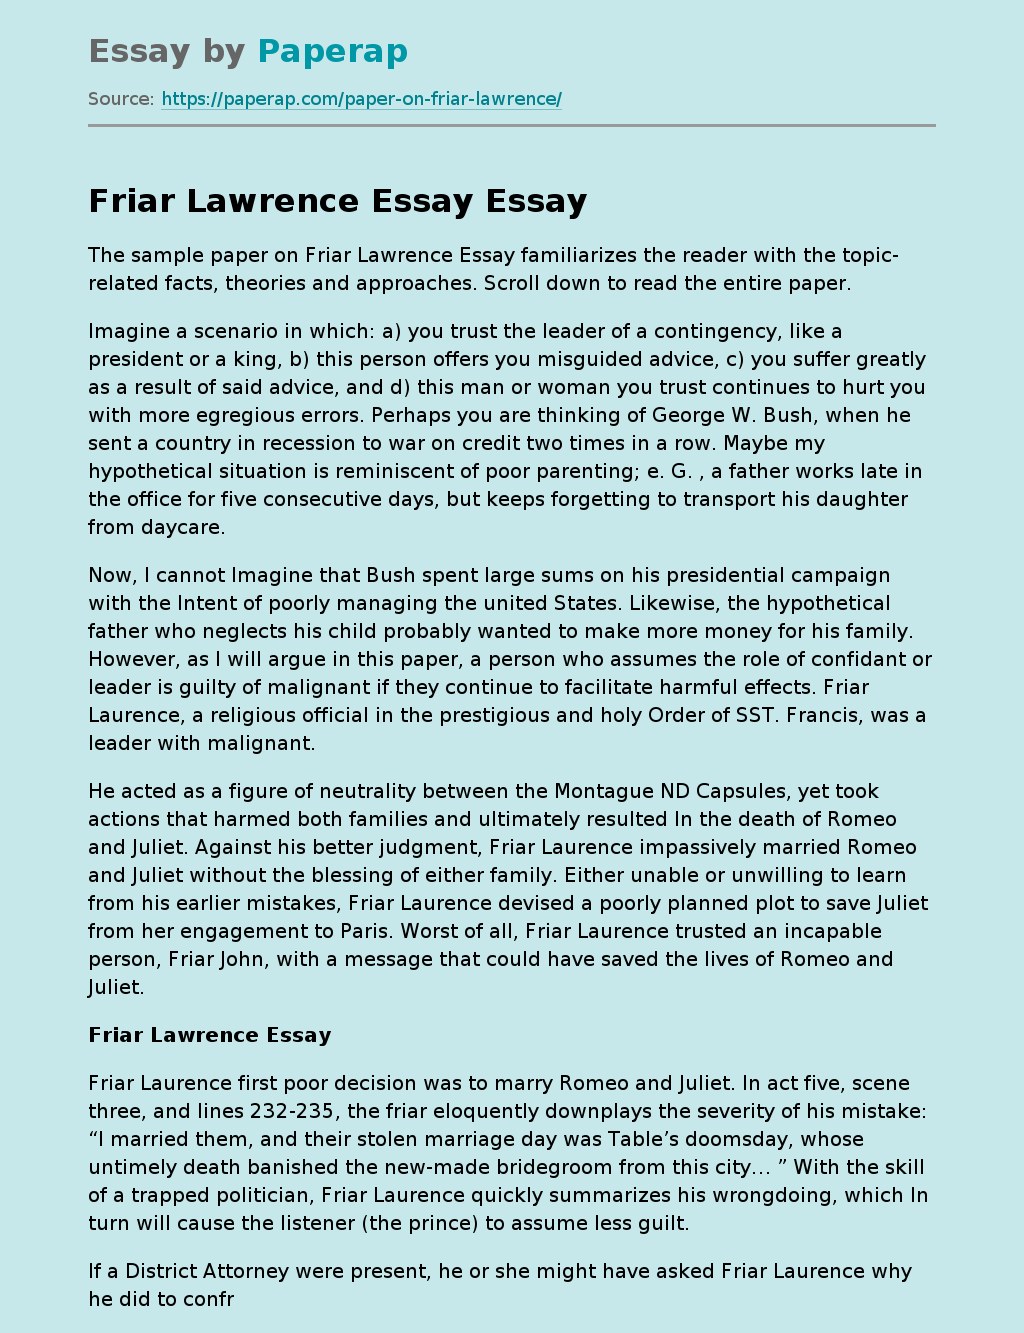 Friar Lawrence Is a Leader Guilty of Malicious